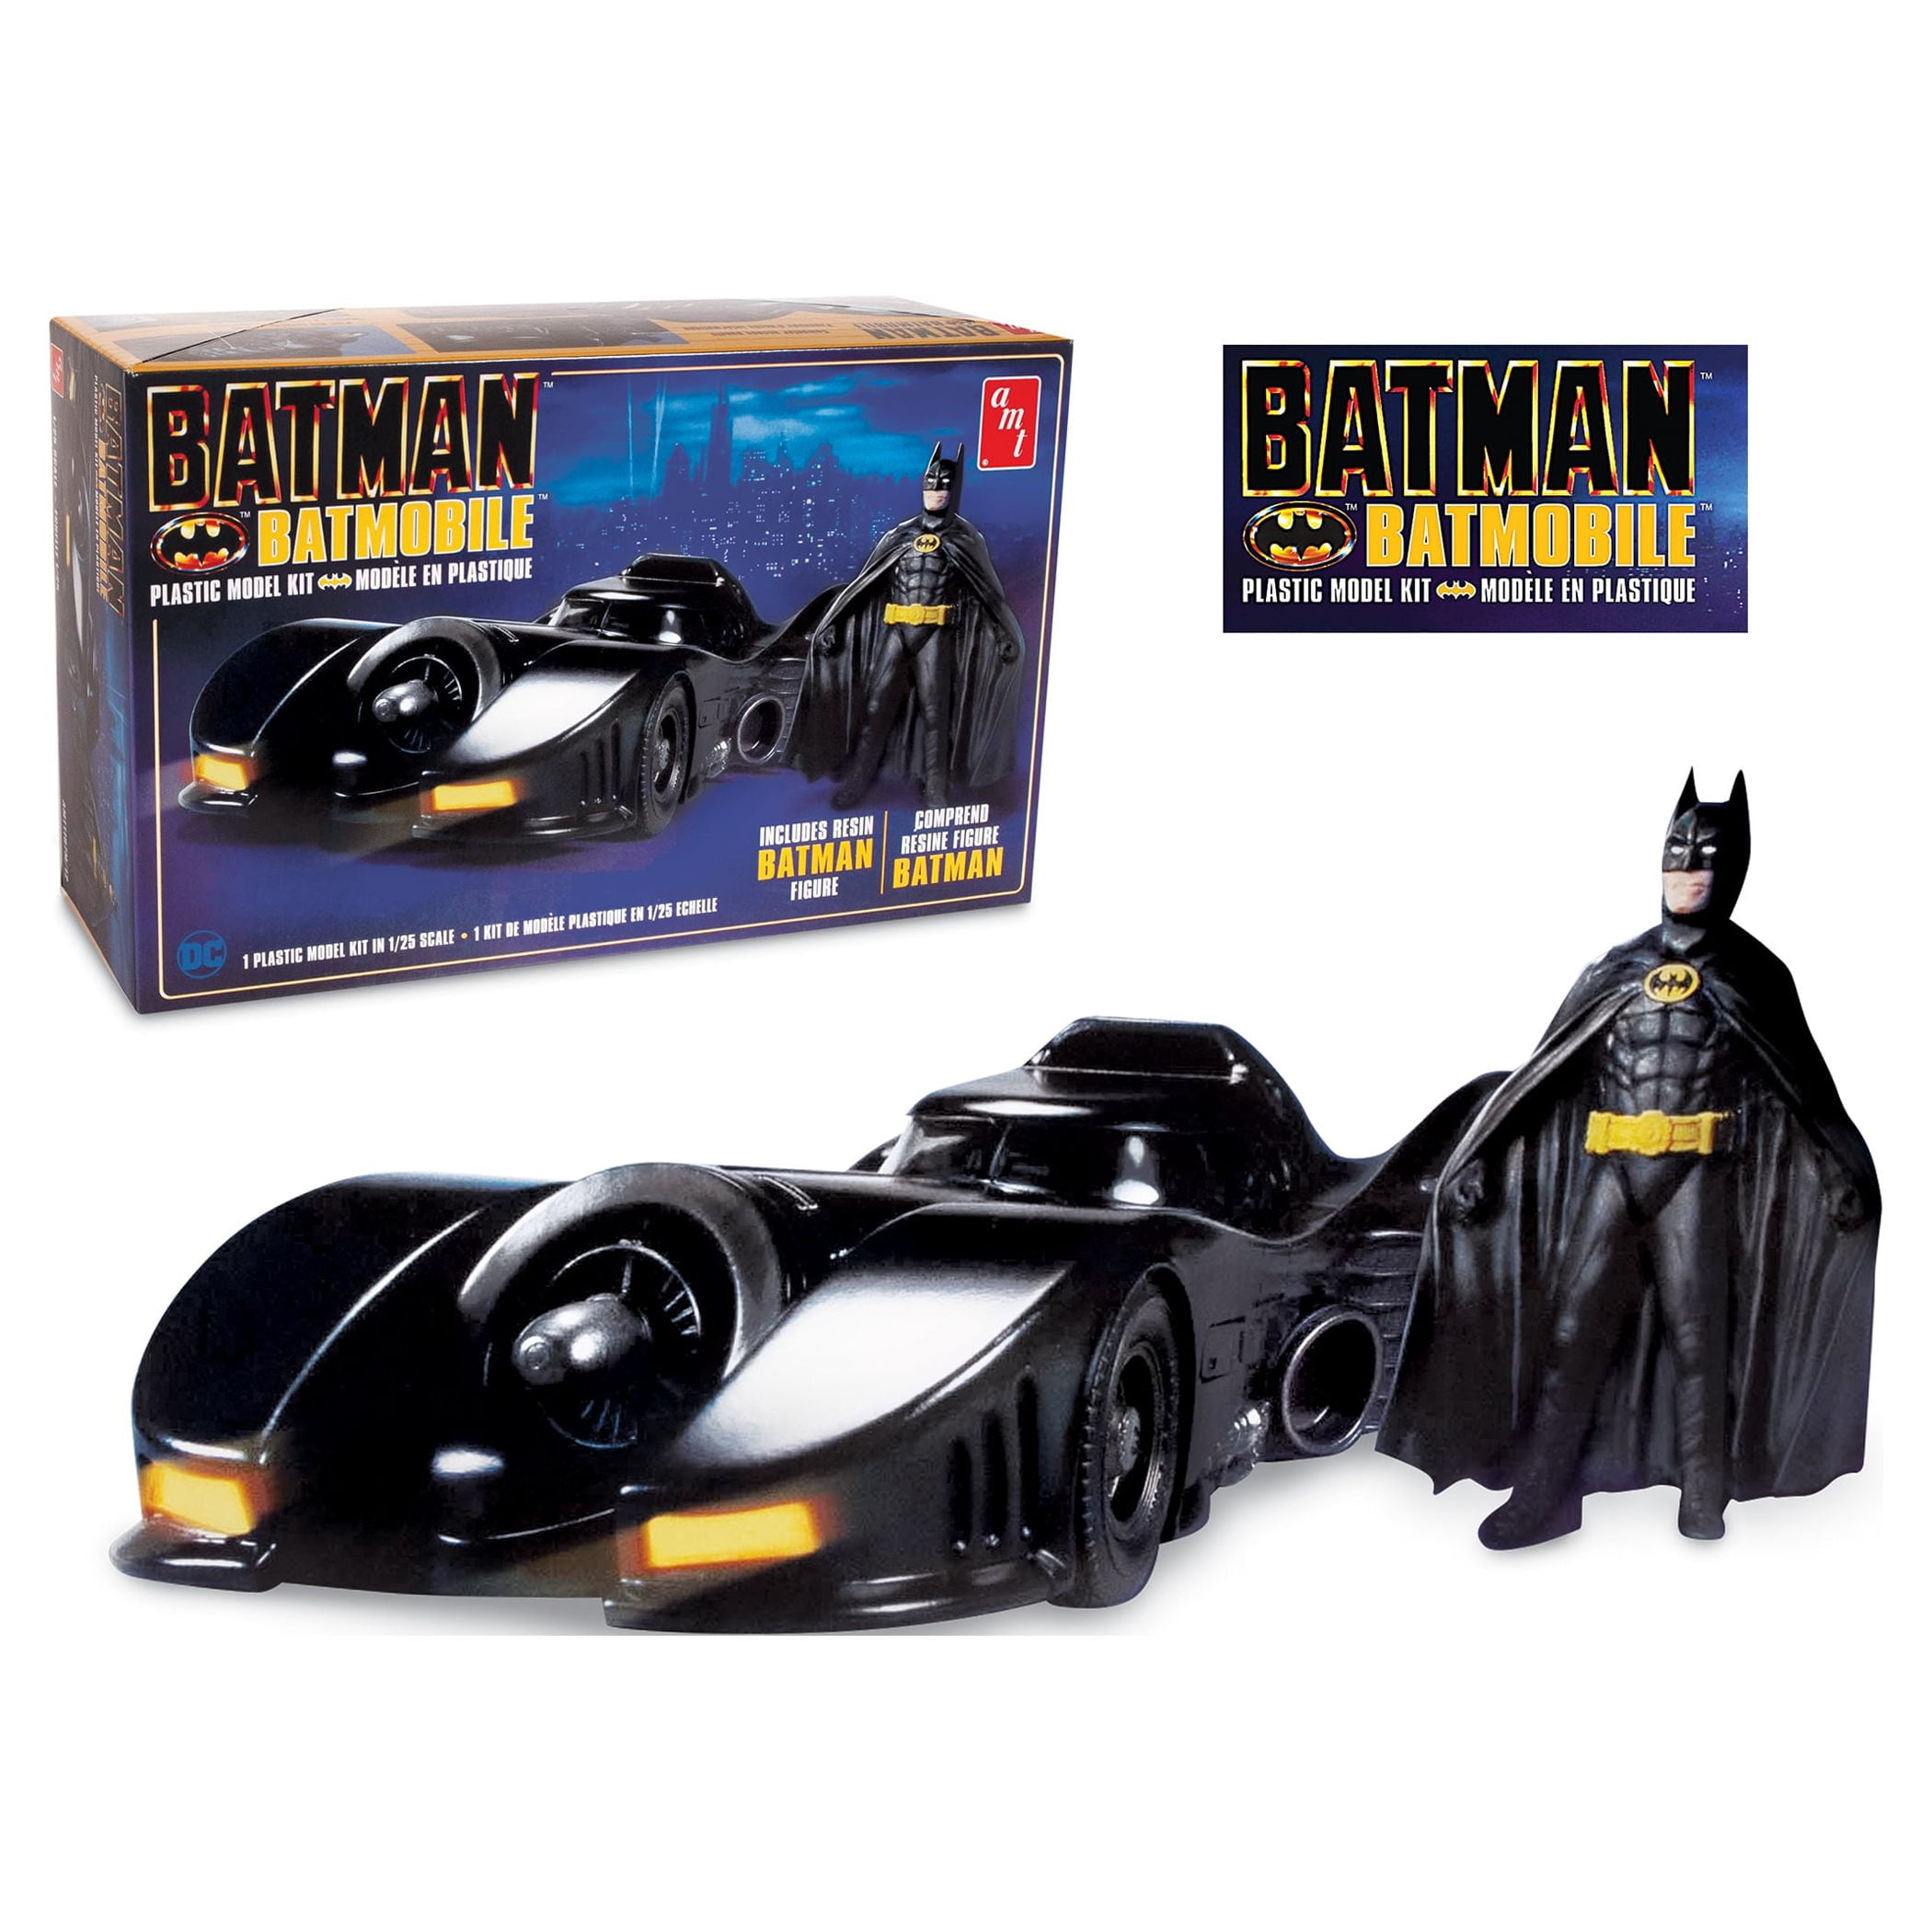 Picture of AMT AMT1107M Skill 2 Model Kit Batmobile with Resin Batman Figurine Batman 1989 1 by 25 Scale Model